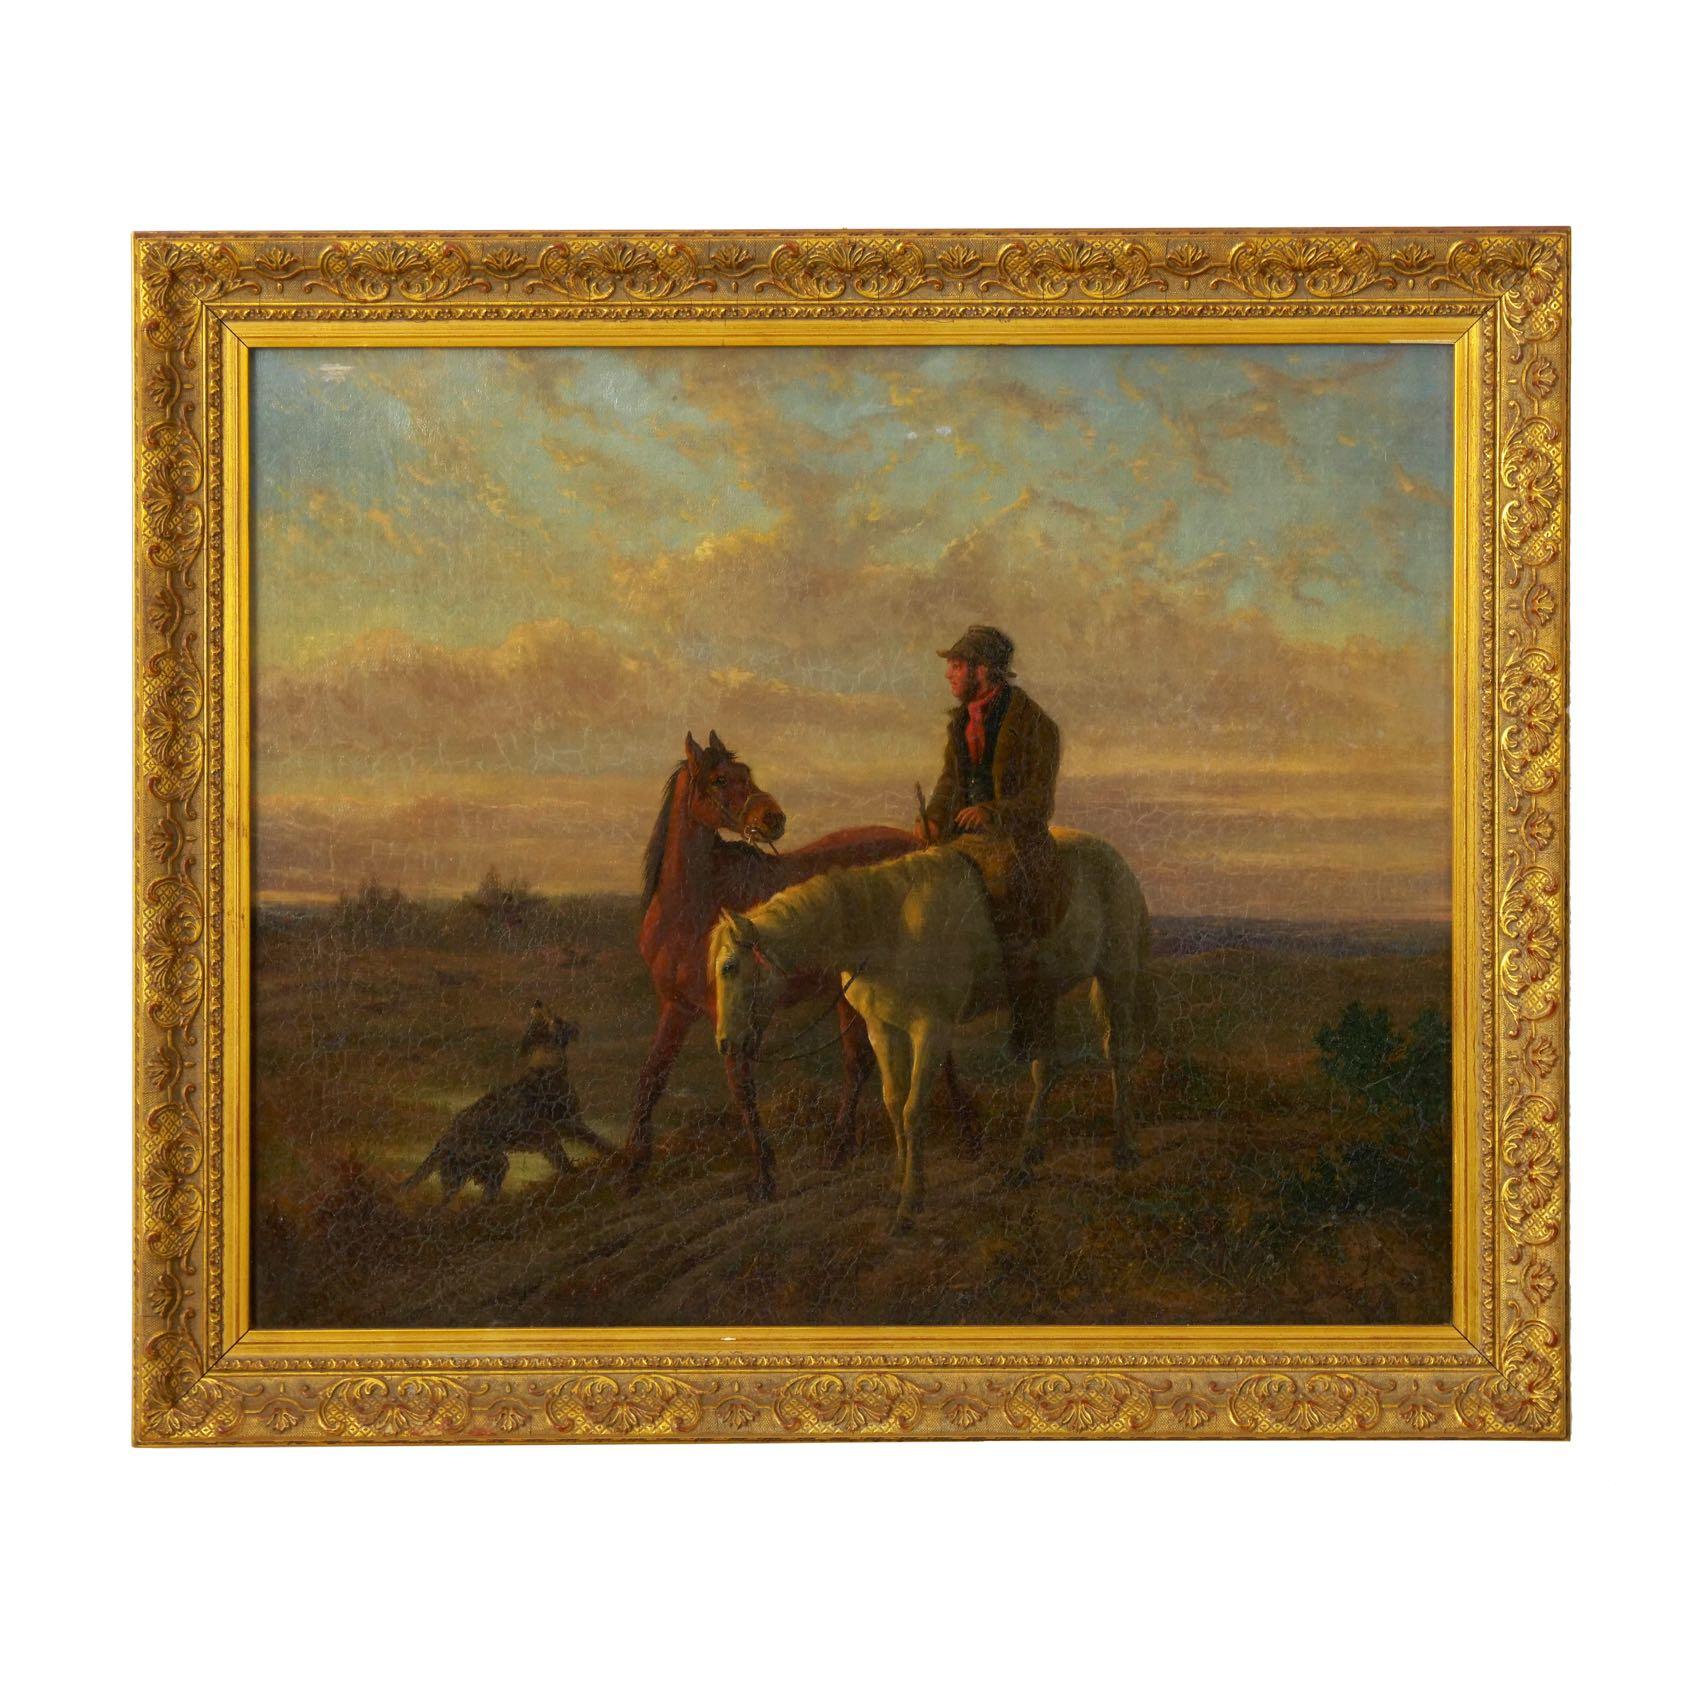 An exquisitely painted Equestrian scene of a rider leading another horse down a dirt path while his dog chases some birds out of the nearby brush. Captured at sunset, the golden hues of the end of the day cast light in a range of pastels across the